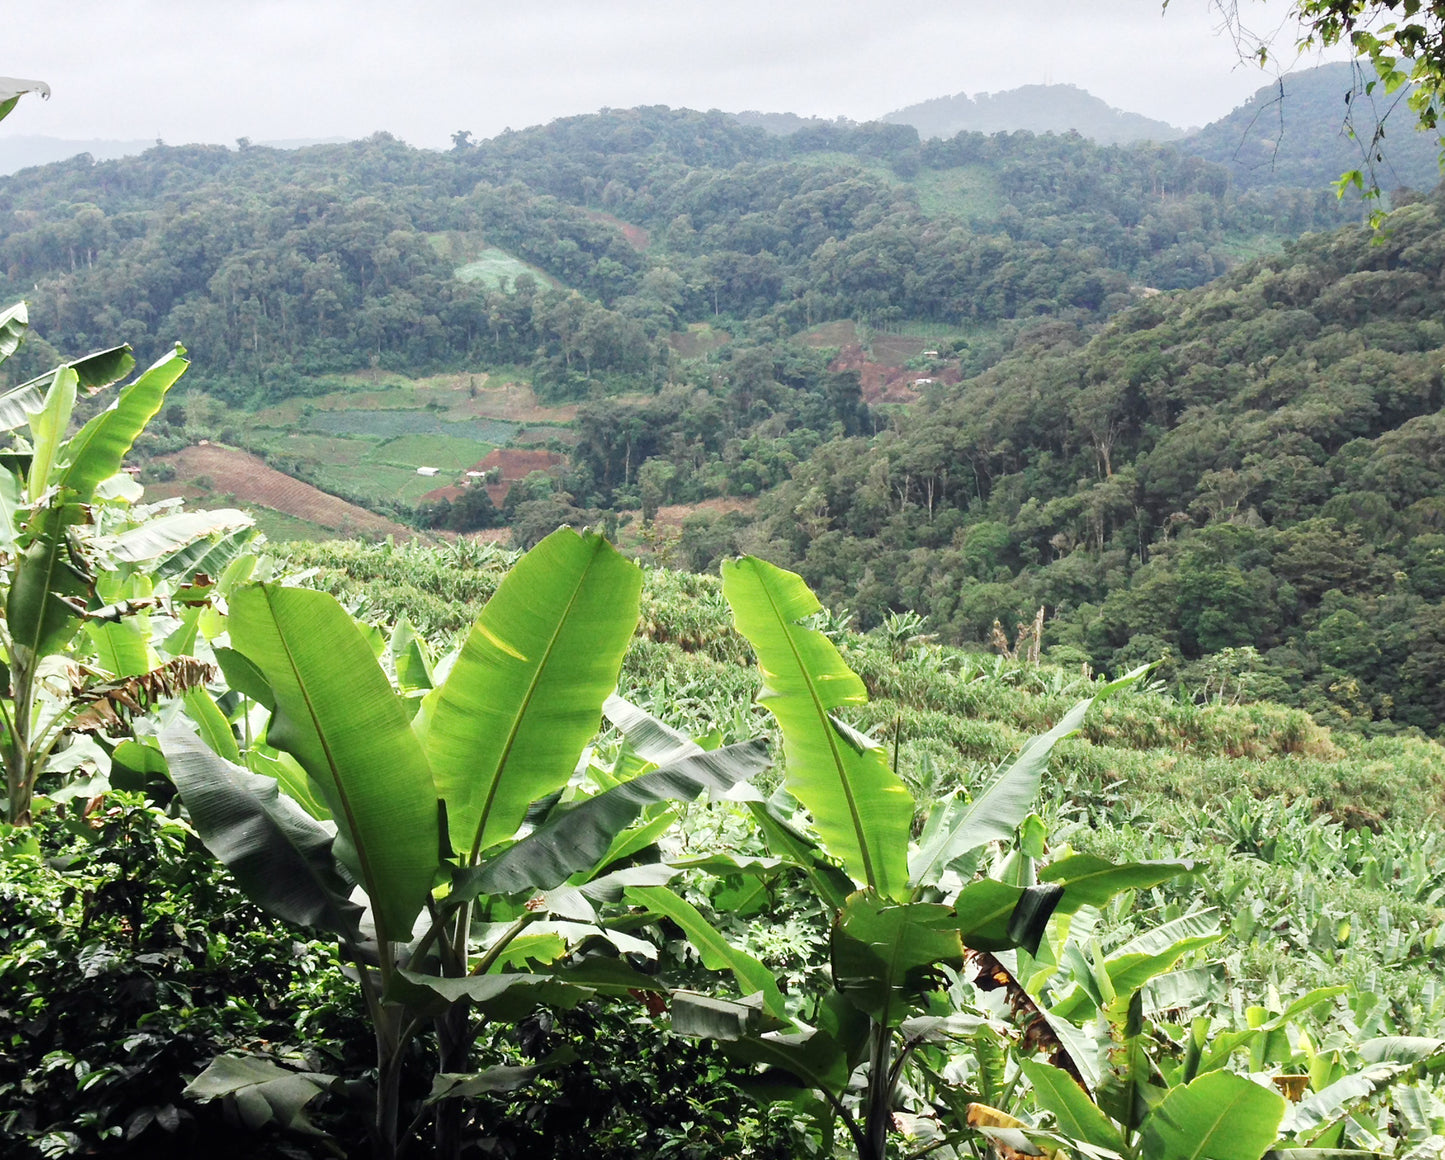 Las Mercedes is a beautiful coffee farm located in Jintotega, located 15 kilometers from the city.  It was founded in 1992 by Federico Lopez.  Lopez has more than 40 years of experience producing coffee.  Seventy of the farm's 140 hectares are devoted to coffee production.  